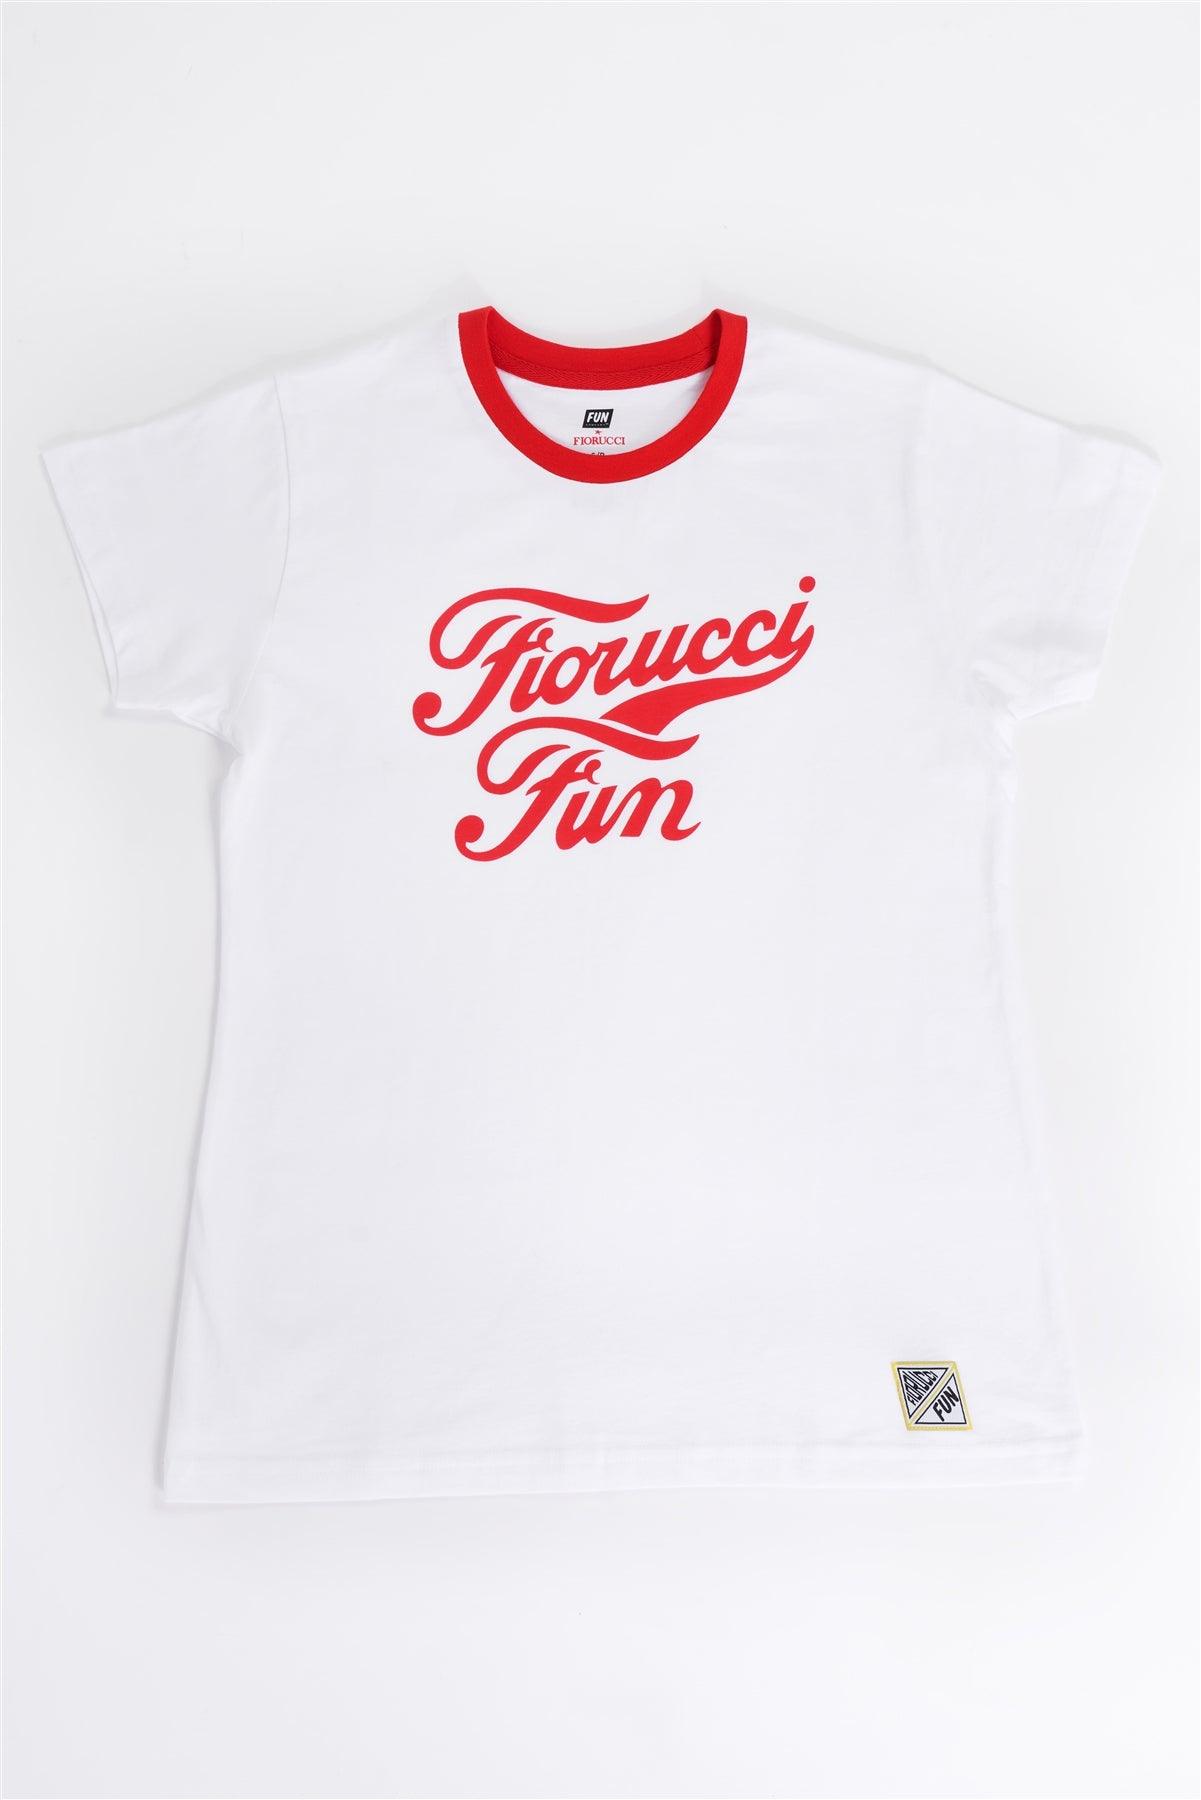 Fiorucci Fun White & Red Printed Logo T-Shirt For Her /2-1-2